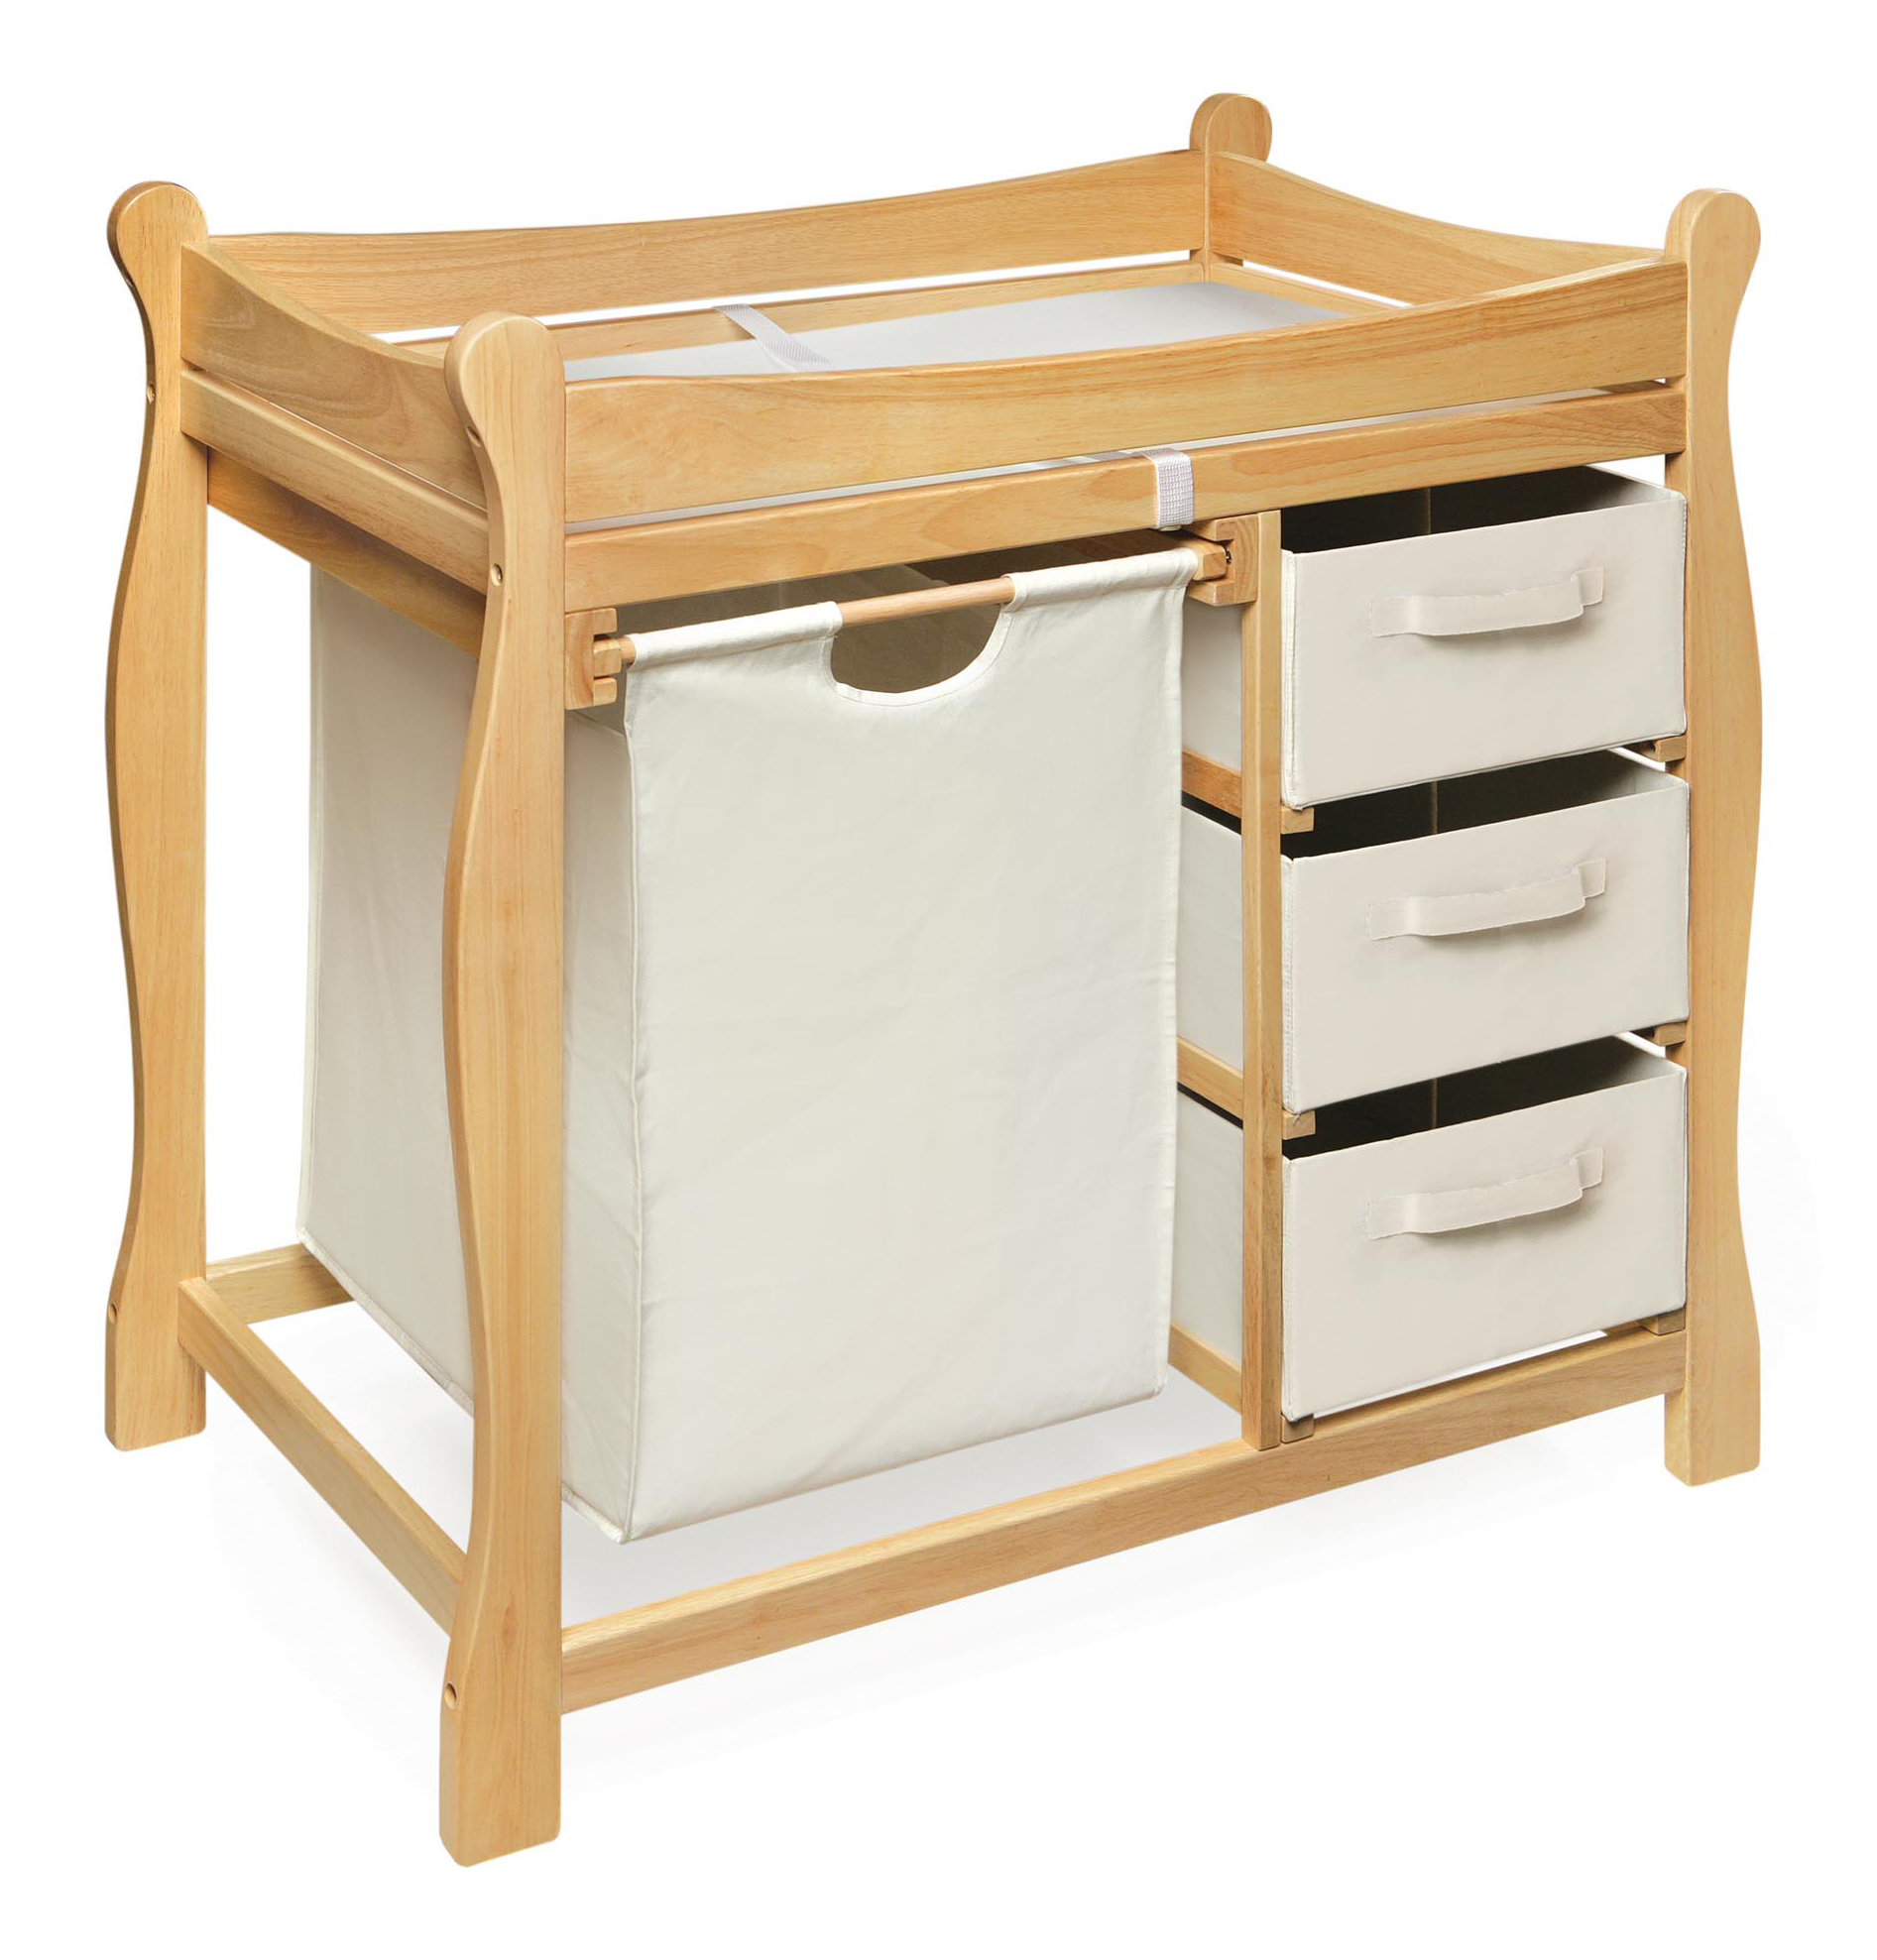 Sleigh Style Baby Changing Table with Hamper and 3 Baskets - Natural